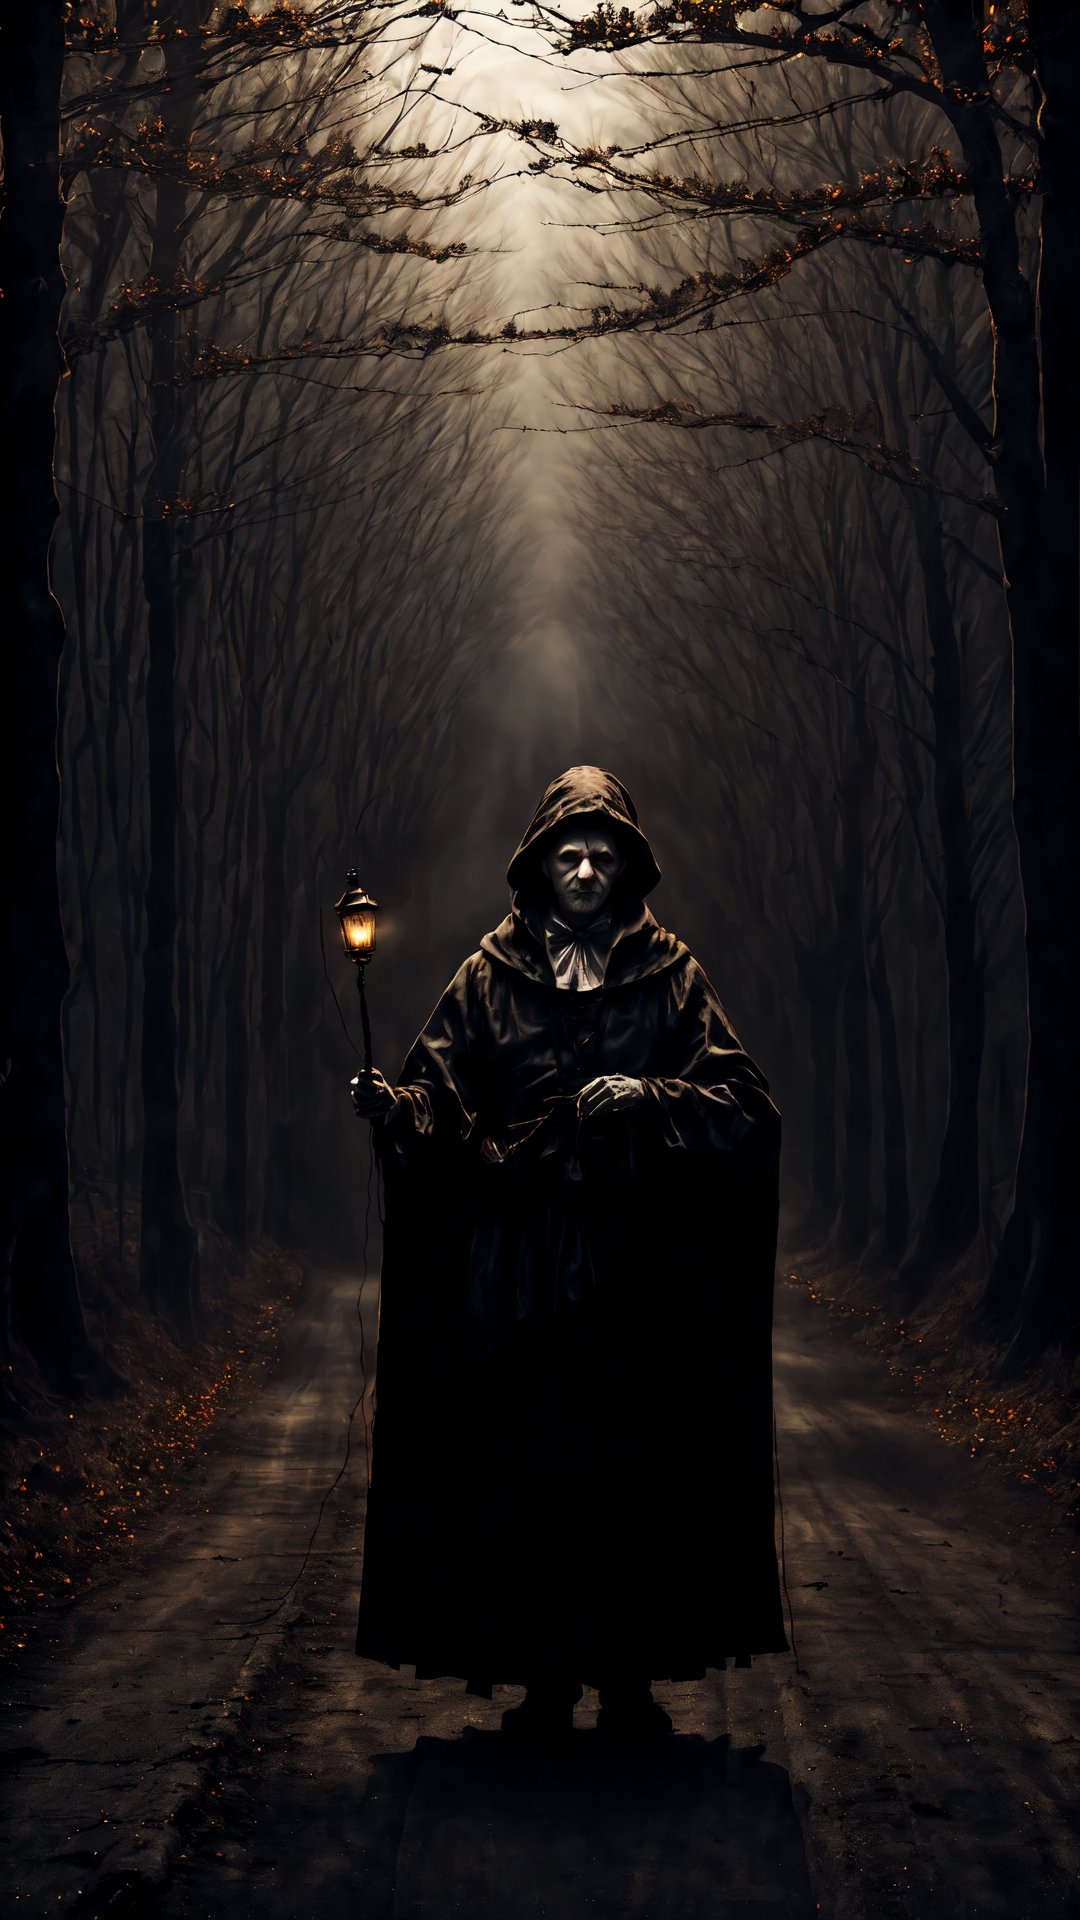 Man in a Halloween spooky mask, white mask like Ghostface, wearing black dirty robe - ((standing middle of a country road:1.4))

foggy, misty, dark, spooky,

 blurry_light_background

Long shot, depth of field, long view ,blurry_light_background,Marionette